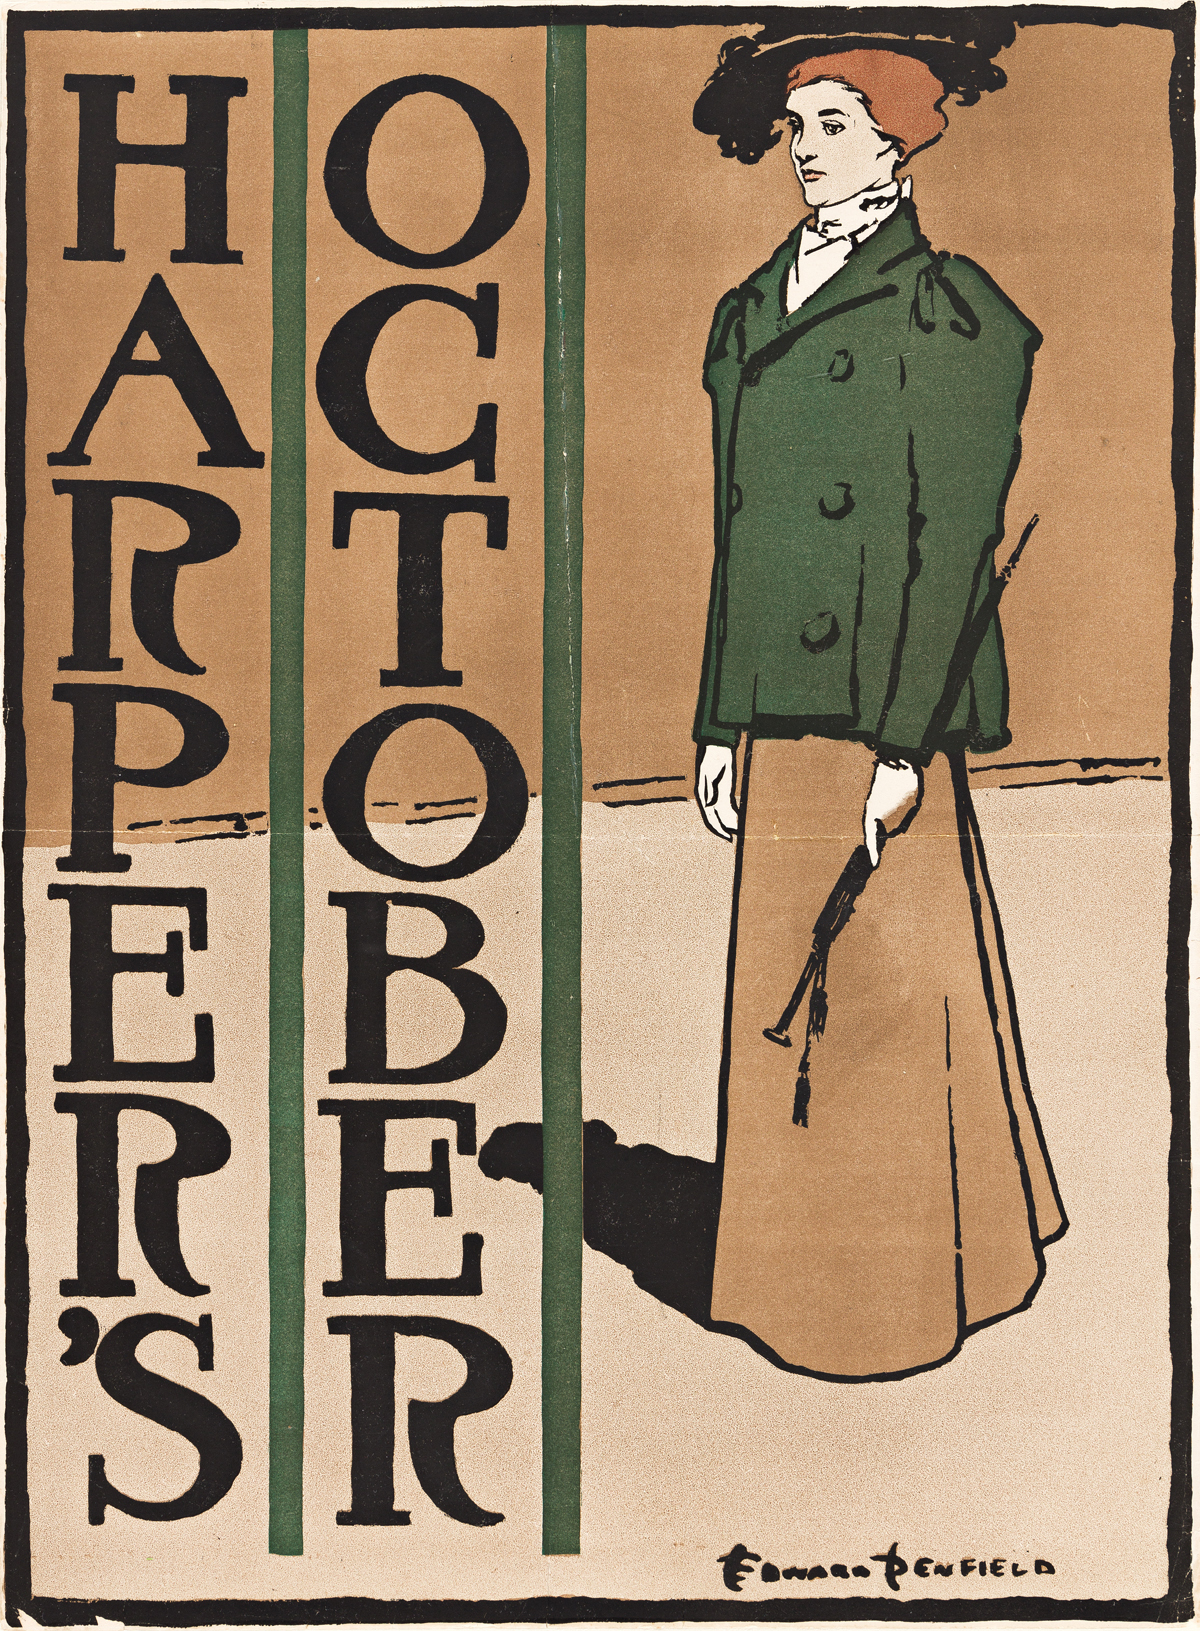 EDWARD PENFIELD (1866-1925).  HARPERS OCTOBER. 1897. 19x14 inches, 49x36 cm.